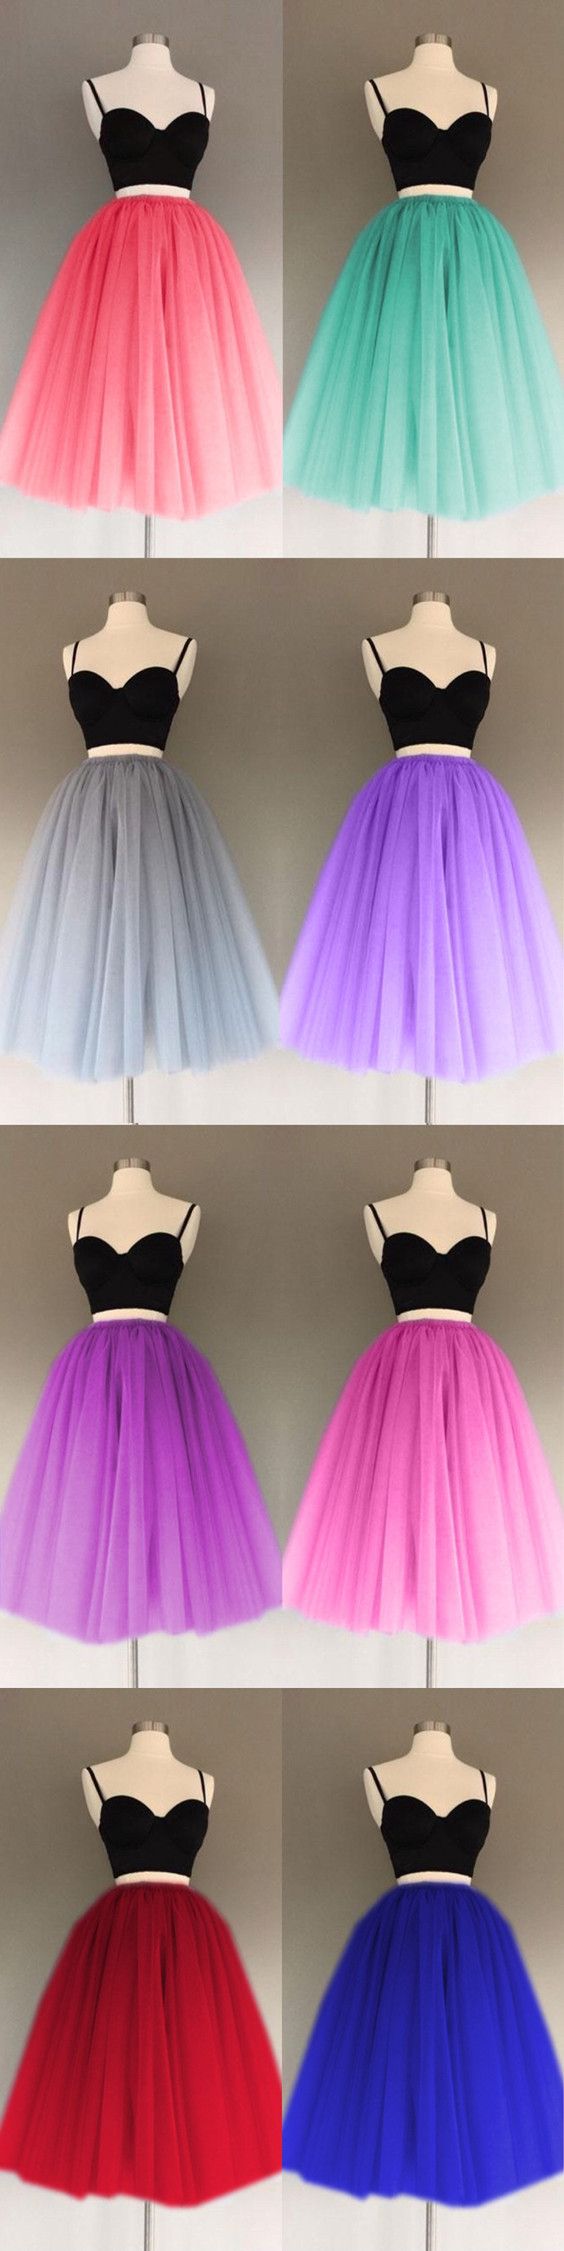 Pretty A Line Tulle Homecoming Dress Two Piece Prom Short Dress,so Cute,love The Tutu Skirt